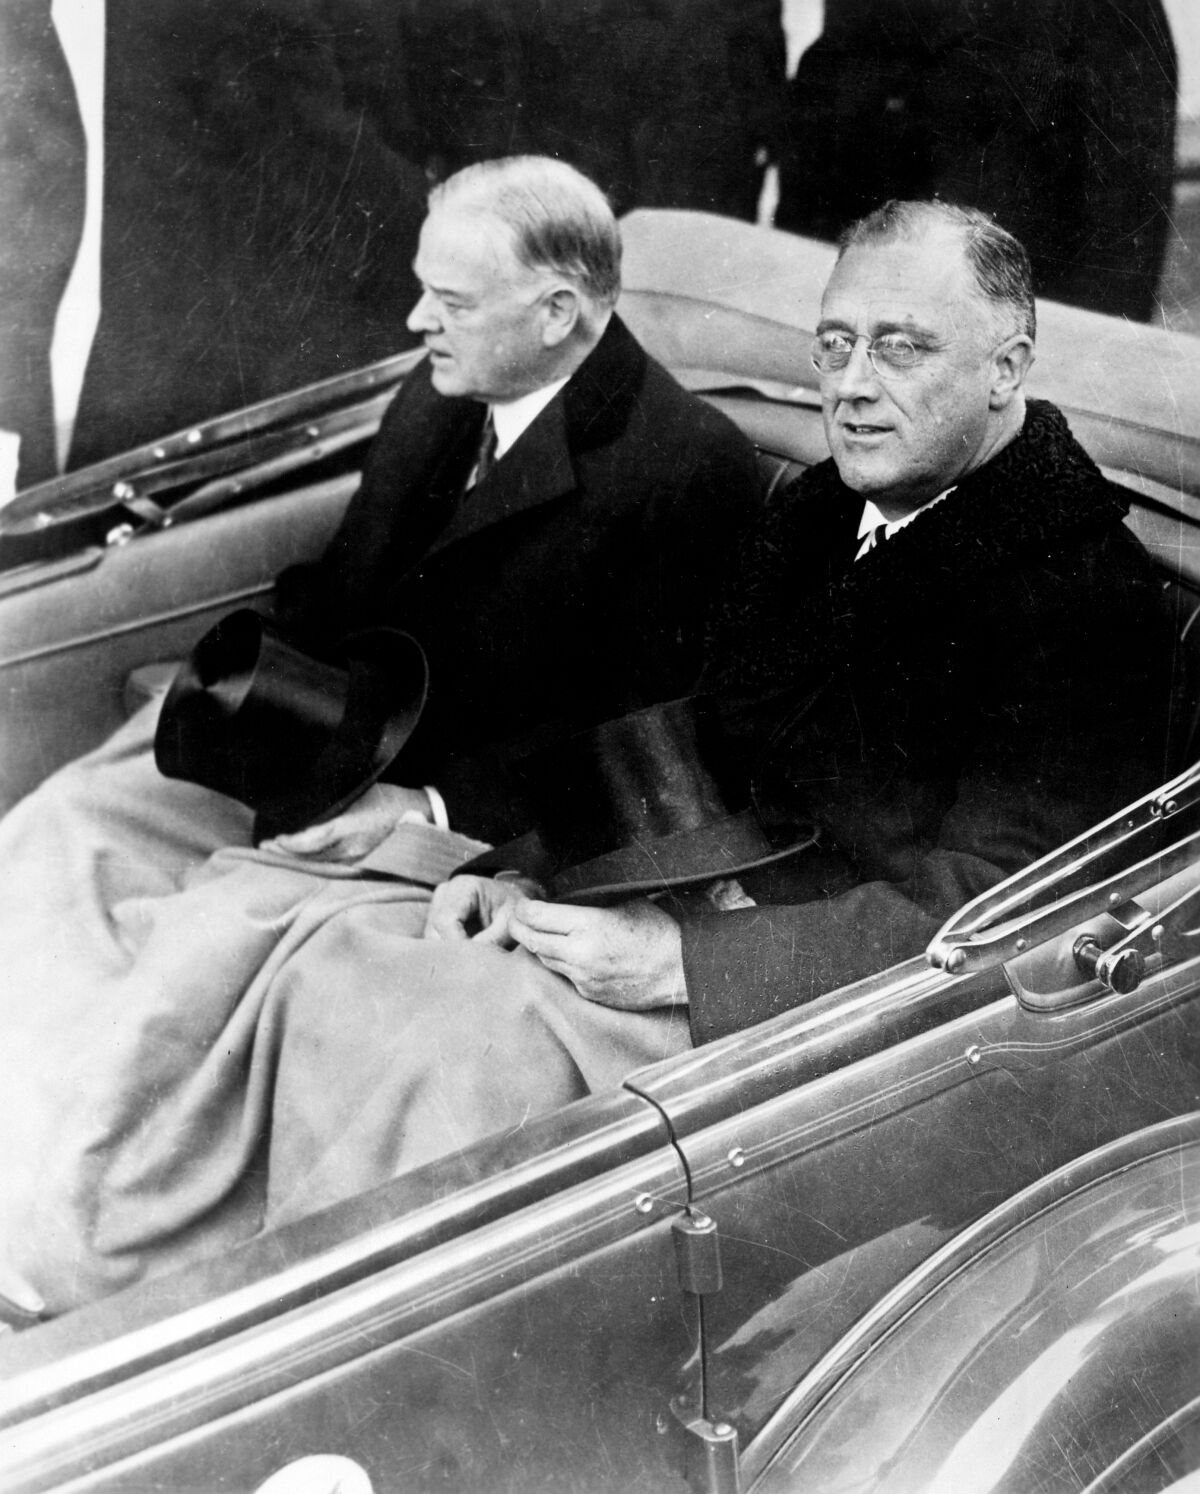 Herbert Hoover and Franklin Delano Roosevelt on their way to the U.S. Capitol for Roosevelt's inauguration in 1933. 